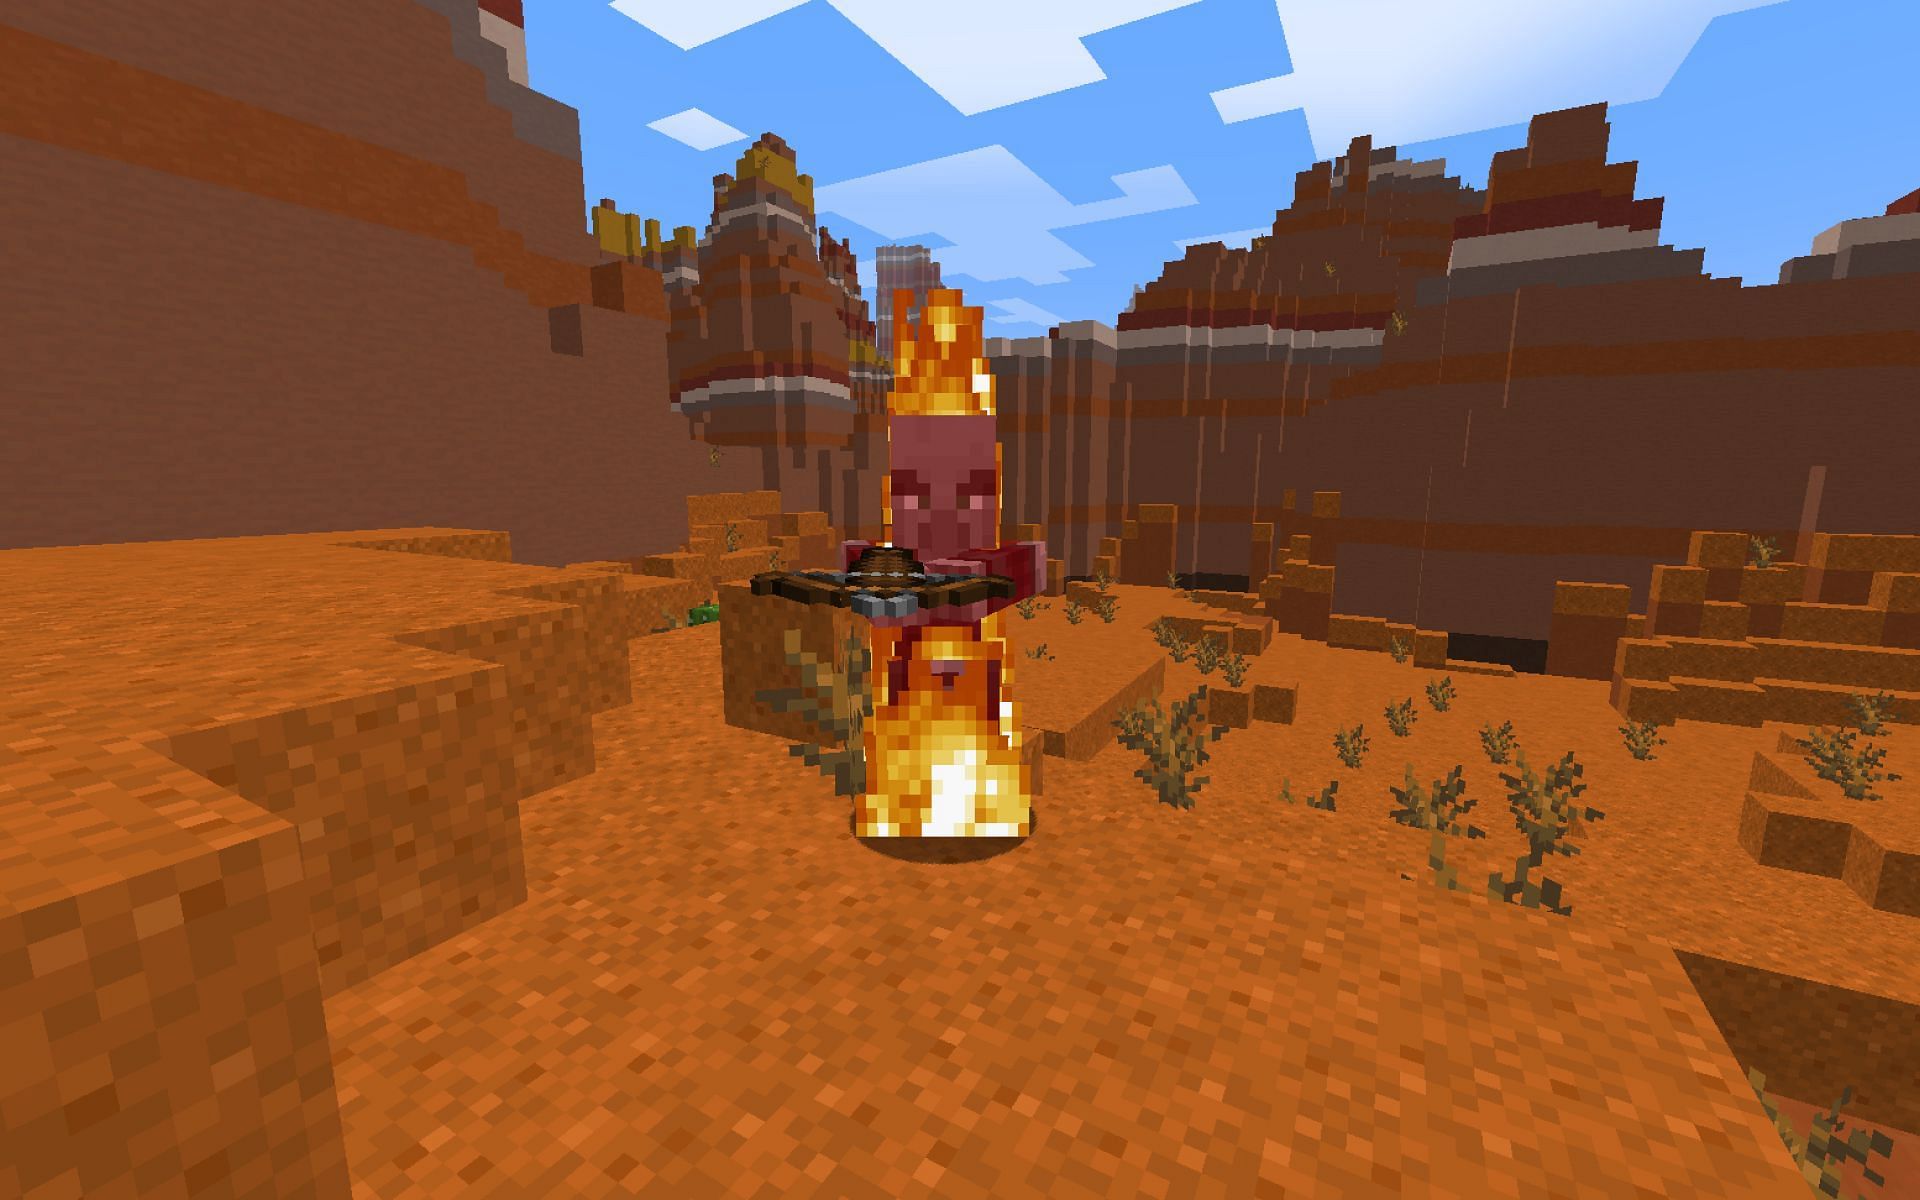 An image of a pillager on fire in-game. Image via Minecraft.